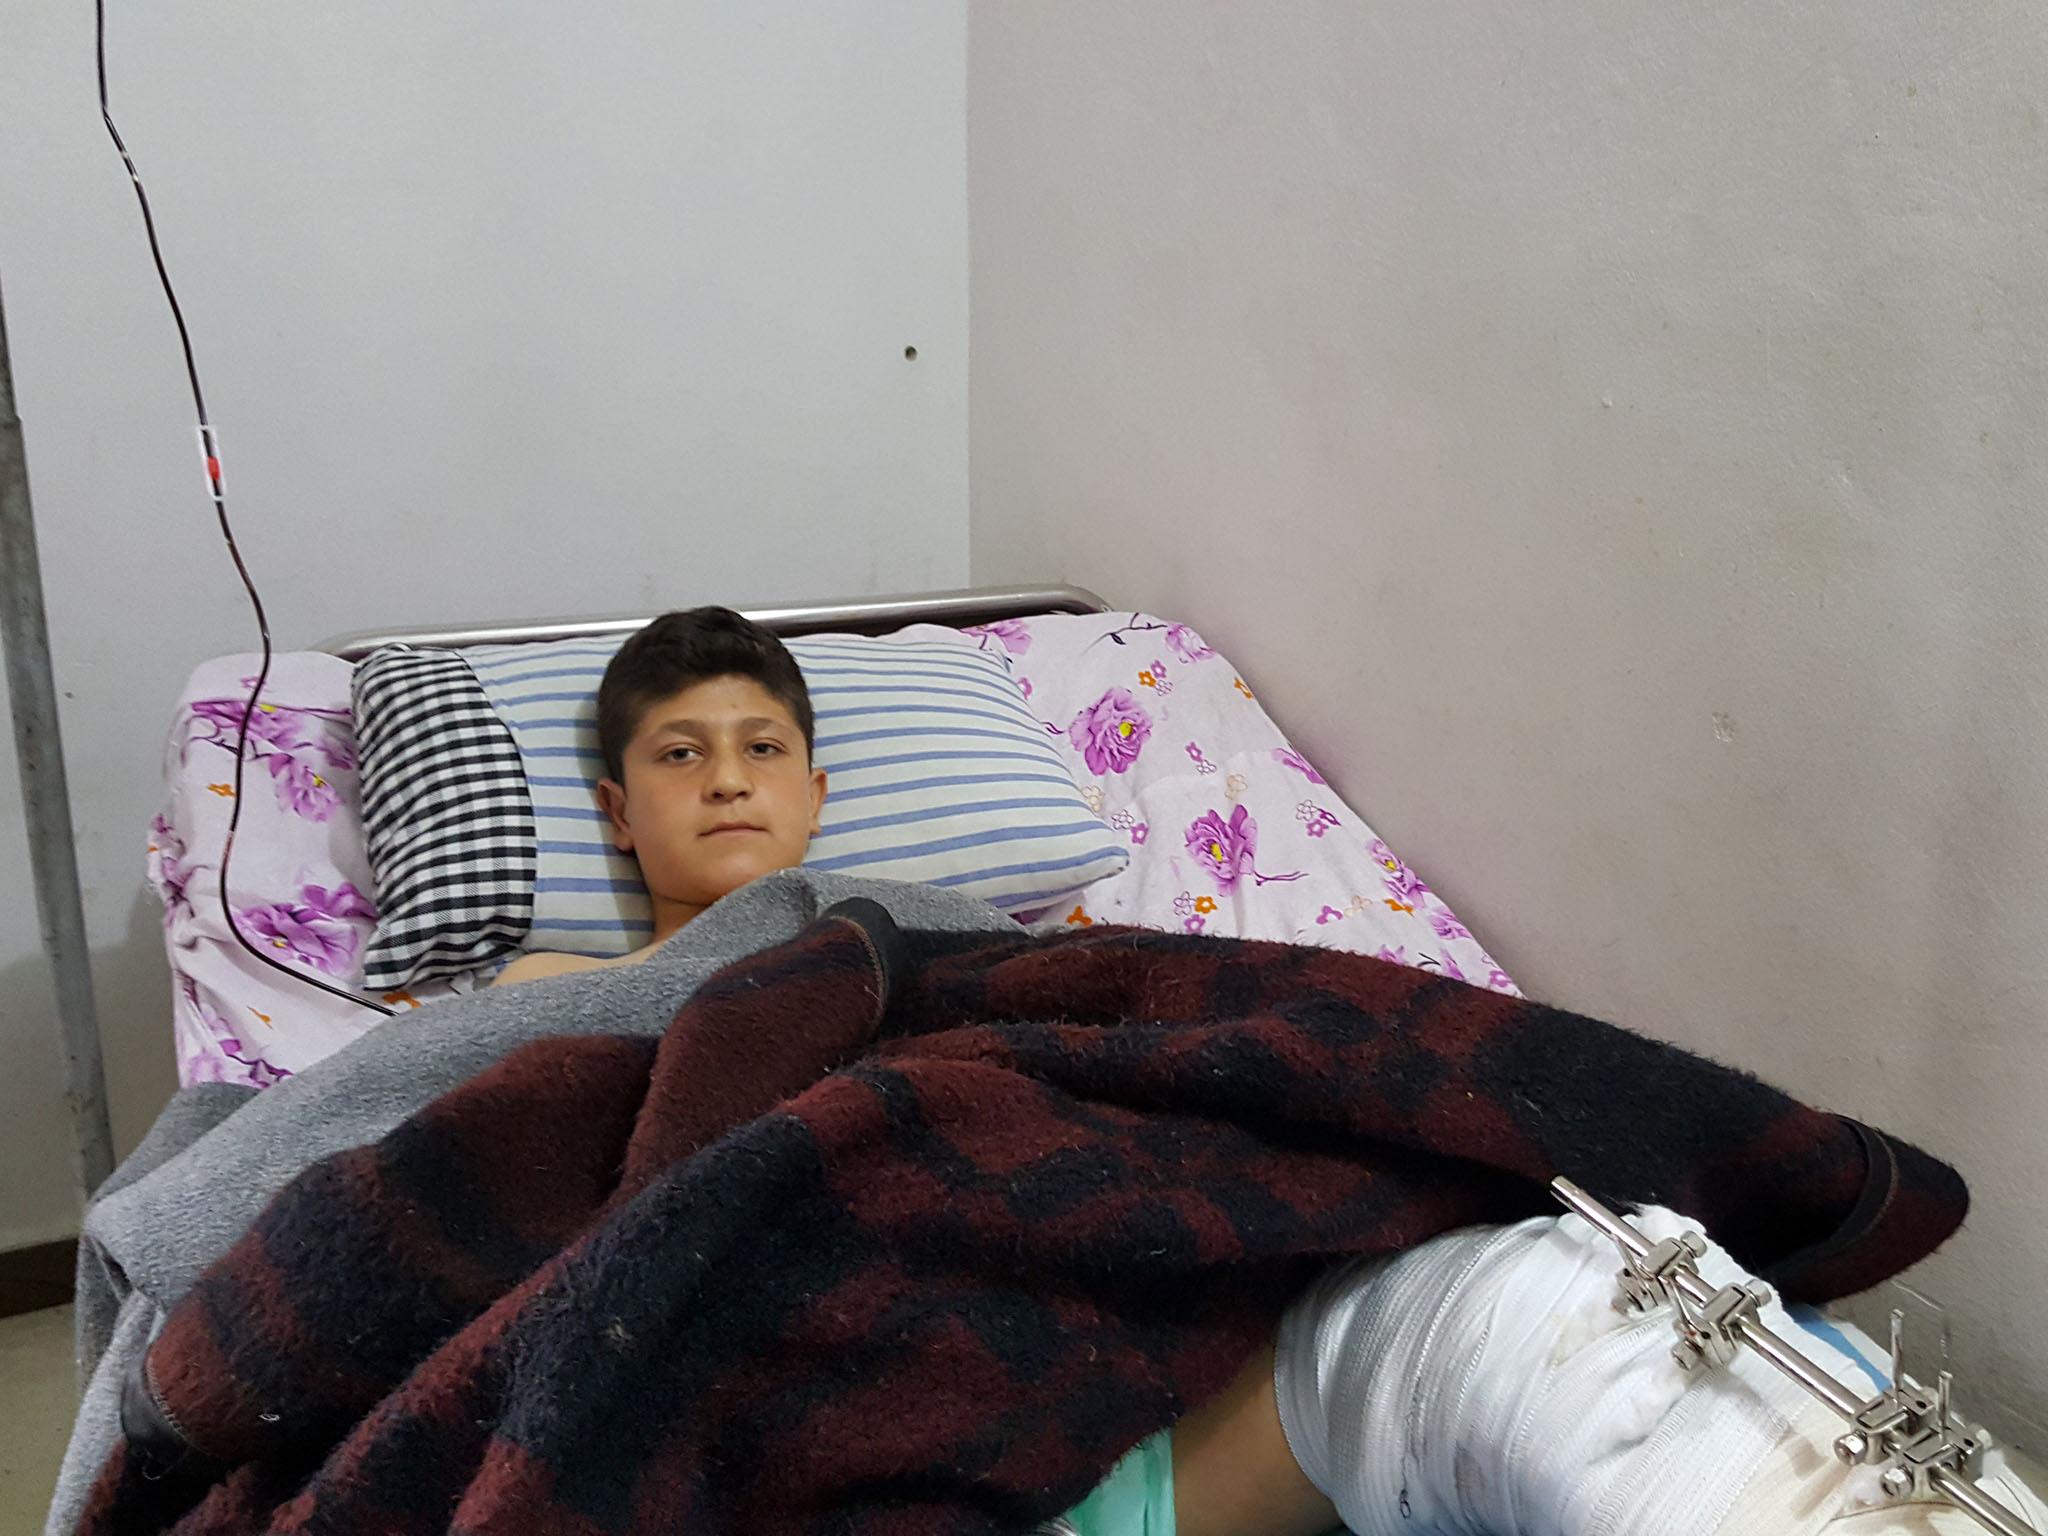 Eight-grade schoolboy Mustafa Khaluf heard the Turkish plane that, moments later, bombed his home and wounded him in the leg, also badly injuring his sister